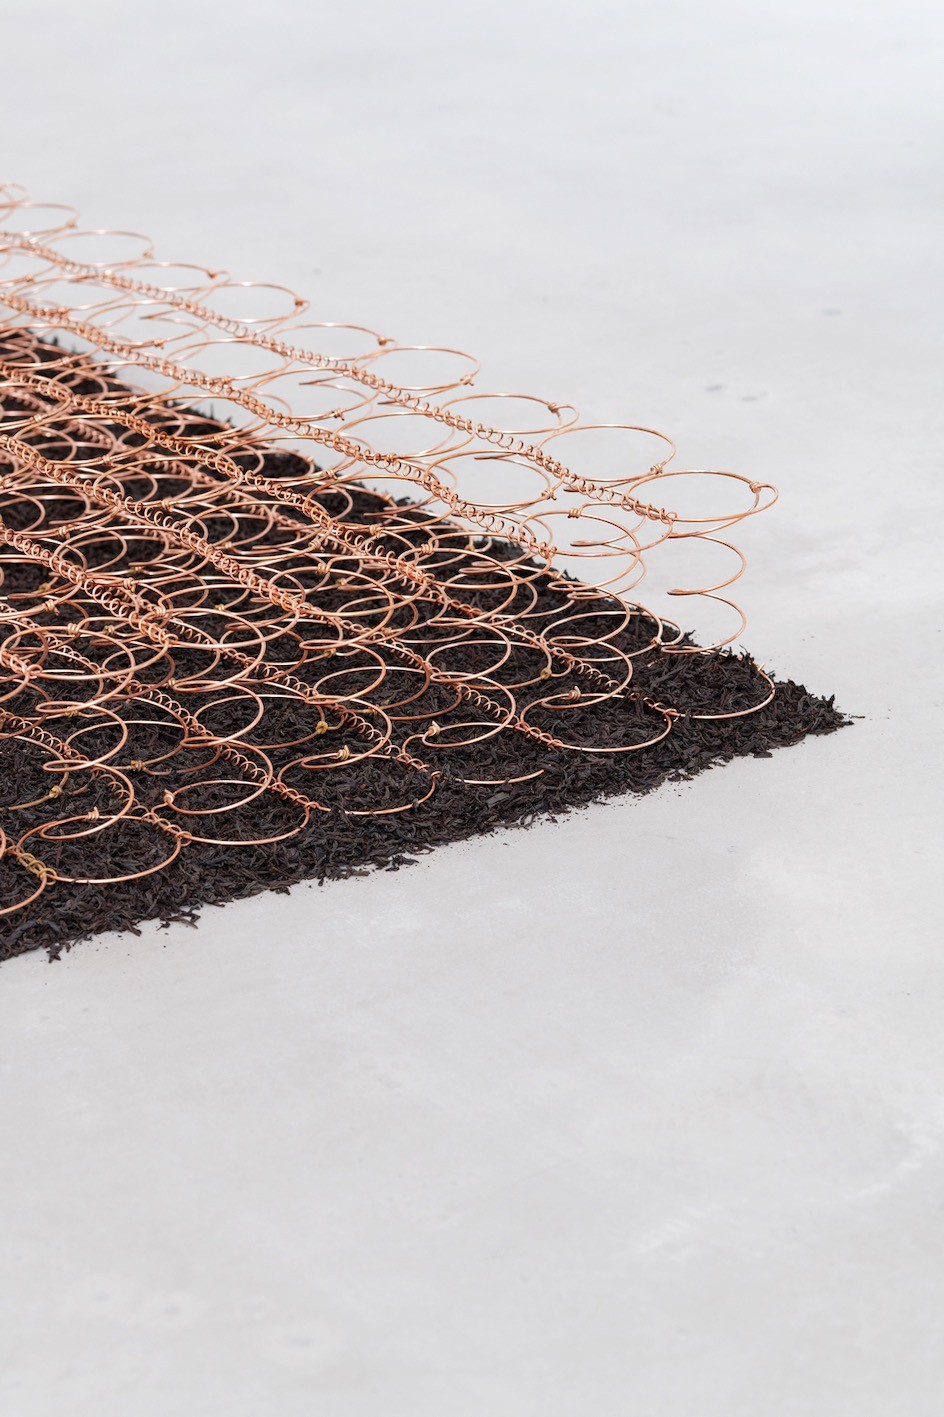 Tranquil, 2020, electroplated copper bed springs, black Ceylan tea, cm. 17 x 194 x 118